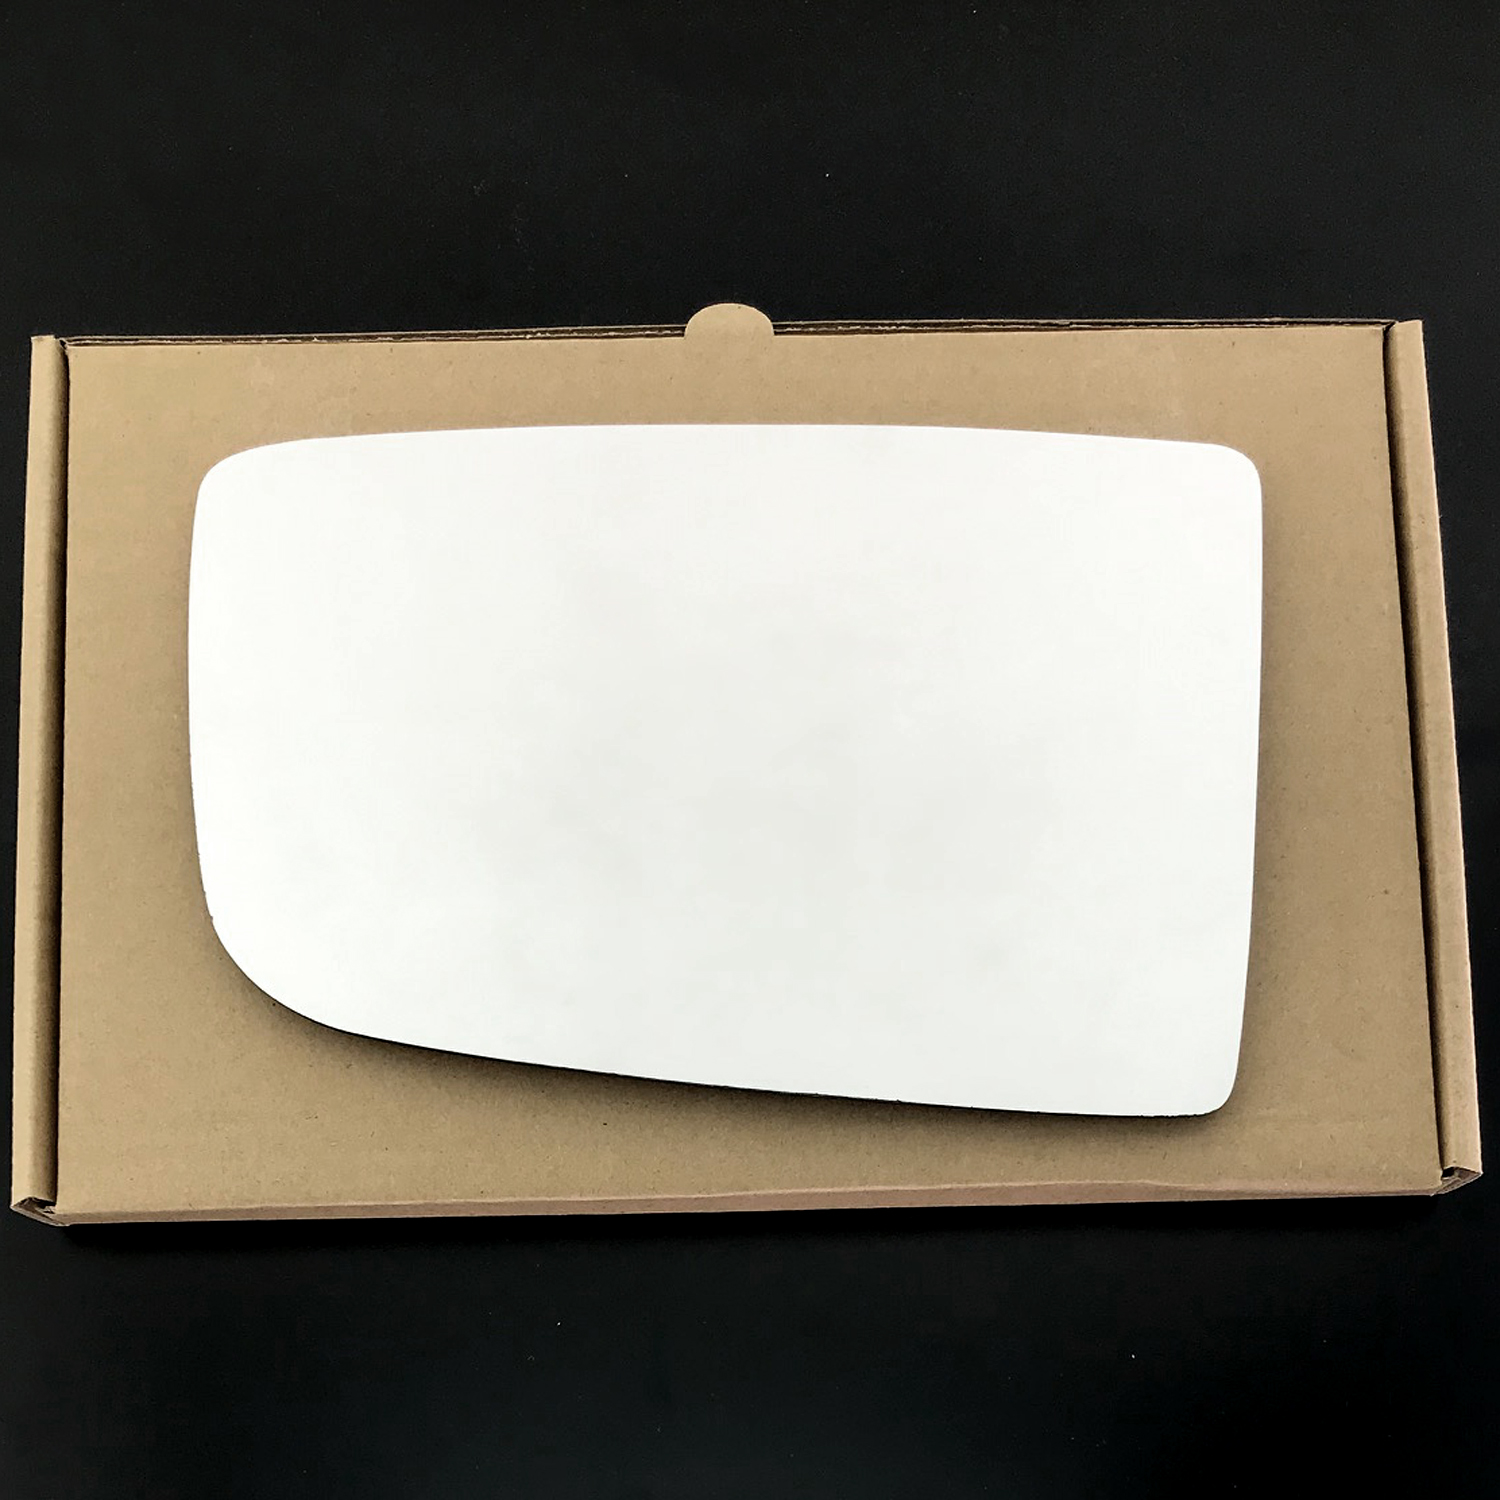 Mercedes Sprinter Wing Mirror Glass LEFT HAND ( UK Passenger Side ) 2006 to 2011 – Convex Wing Mirror ( Slide On Fitting )